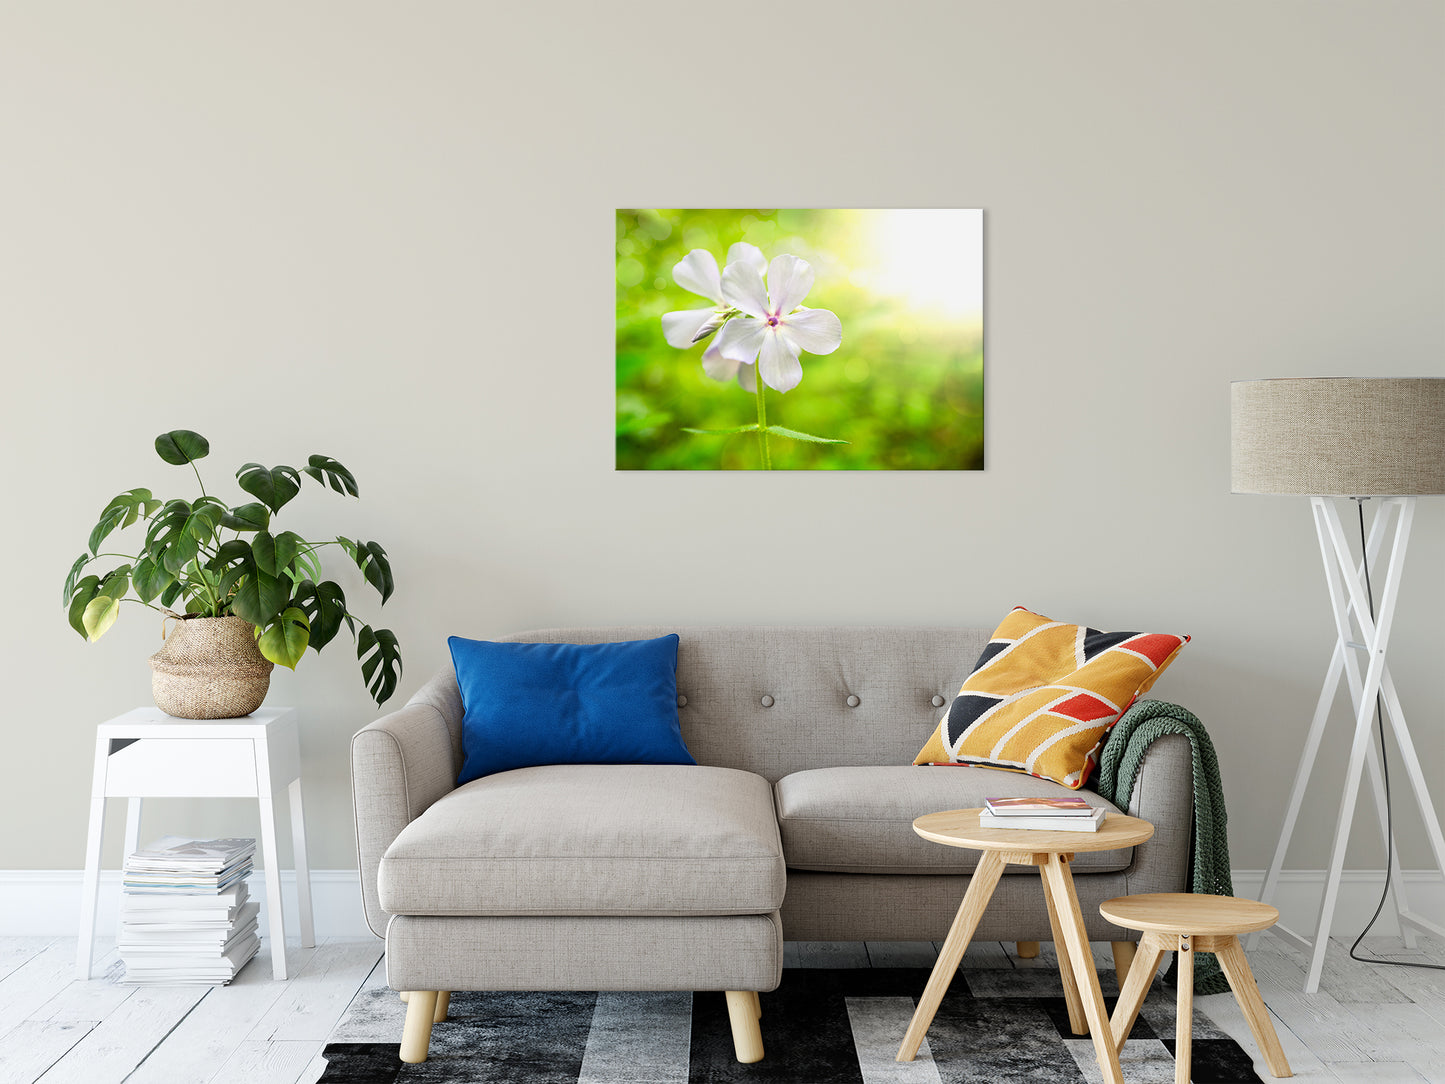 Beauty of the Forest Floor Nature / Floral Photo Fine Art Canvas Wall Art Prints 24" x 36" - PIPAFINEART